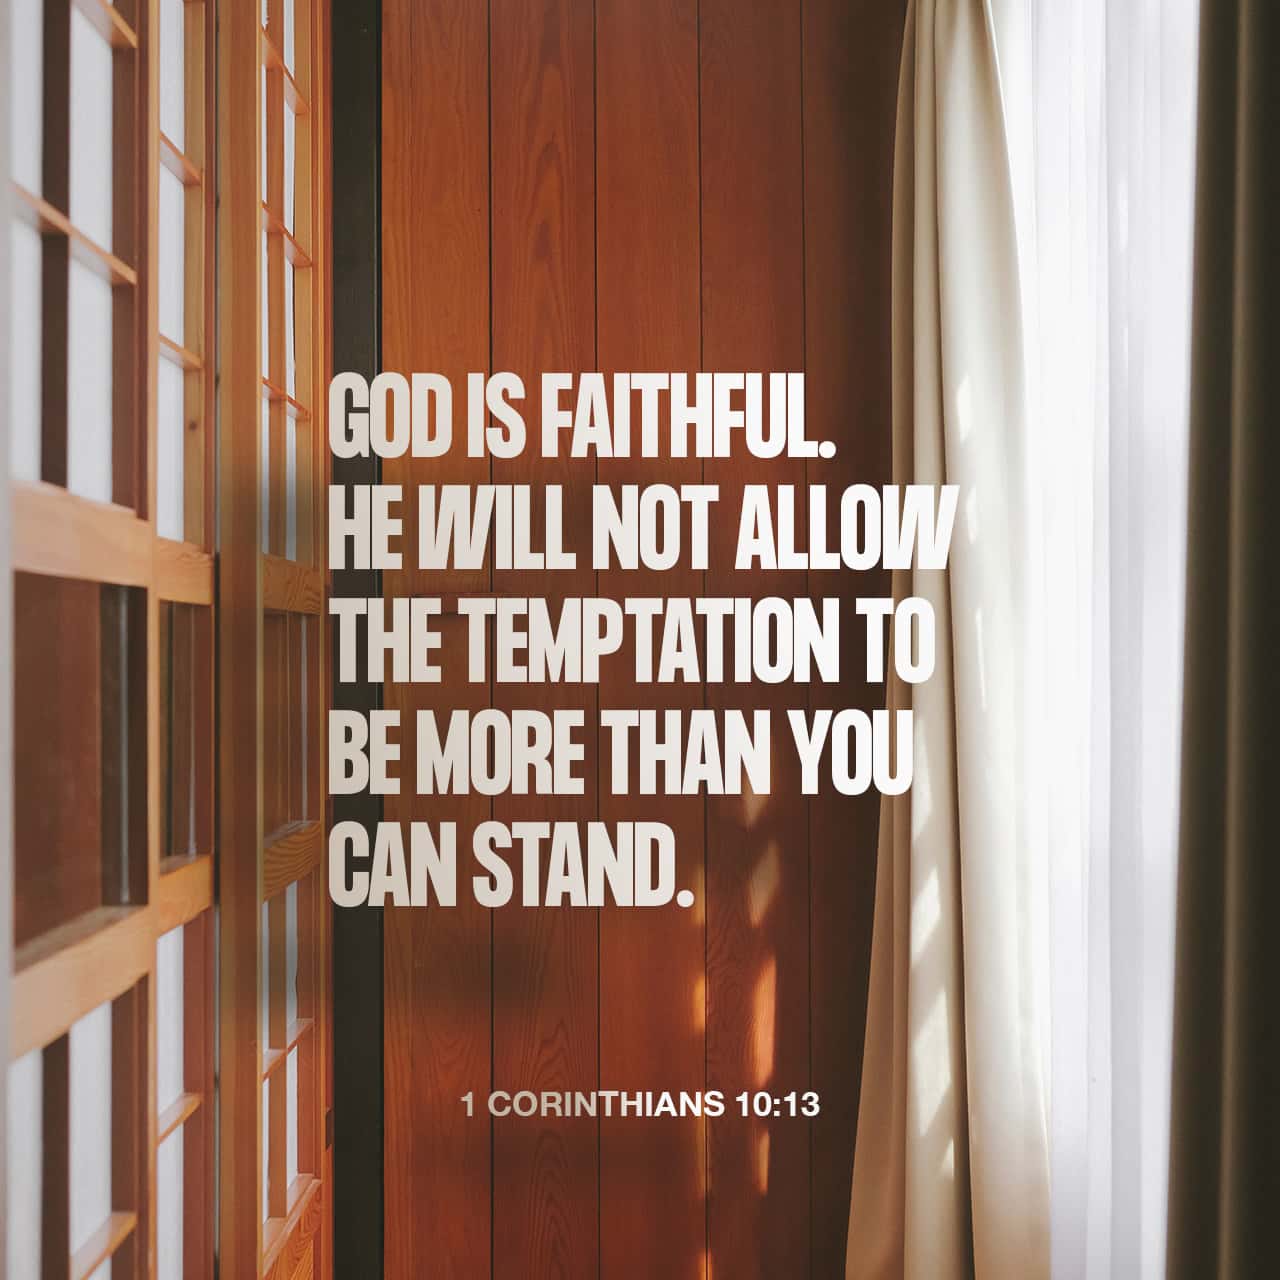 1 Corinthians 10:13 No temptation has overtaken you except what is common  to mankind. And God is faithful; he will not let you be tempted beyond what  you can bear. But when